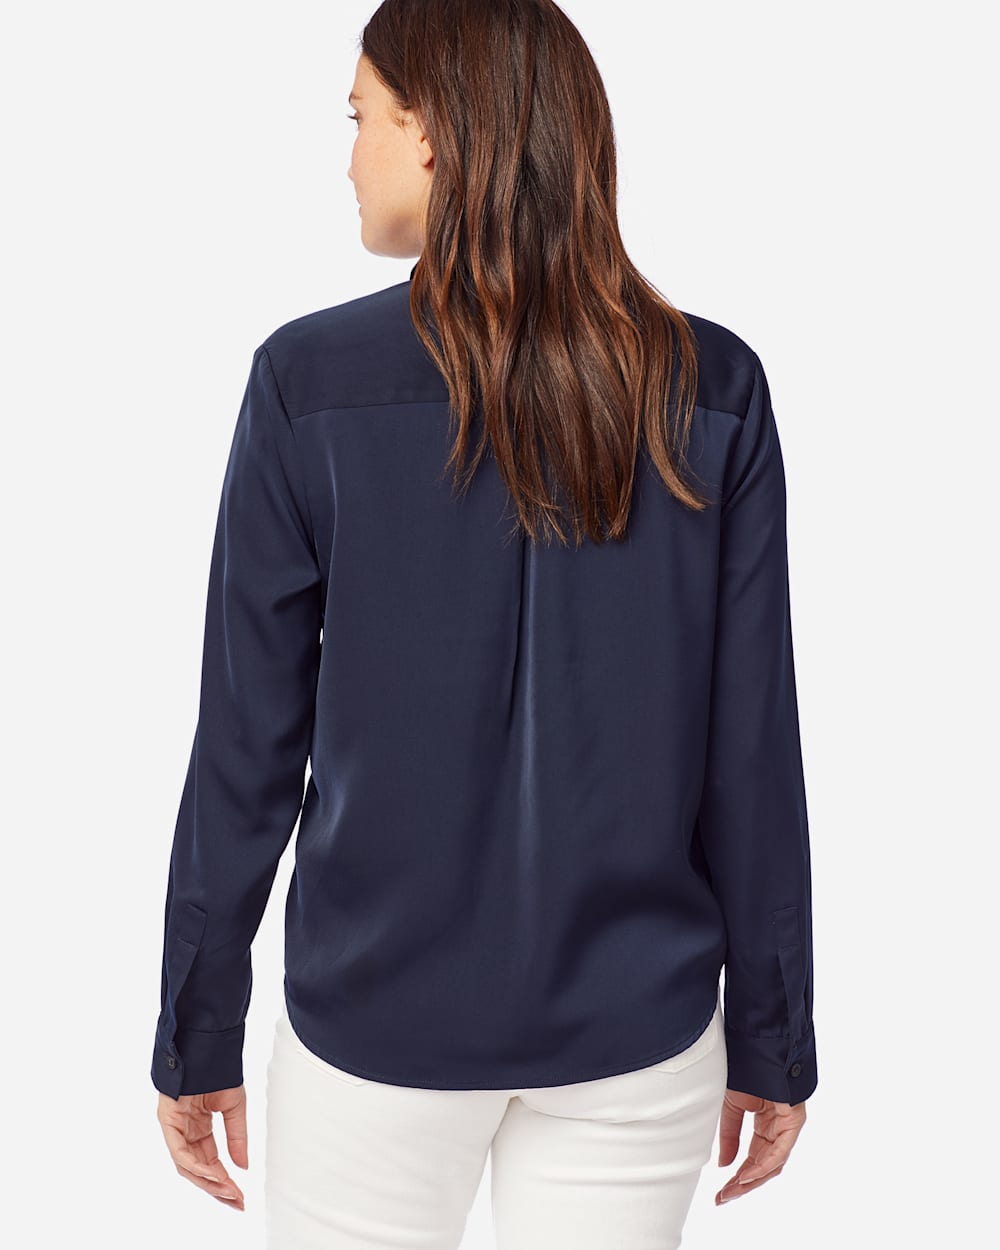 ALTERNATE VIEW OF WOMEN'S SOFT BUTTON SHIRT IN MIDNIGHT NAVY image number 3